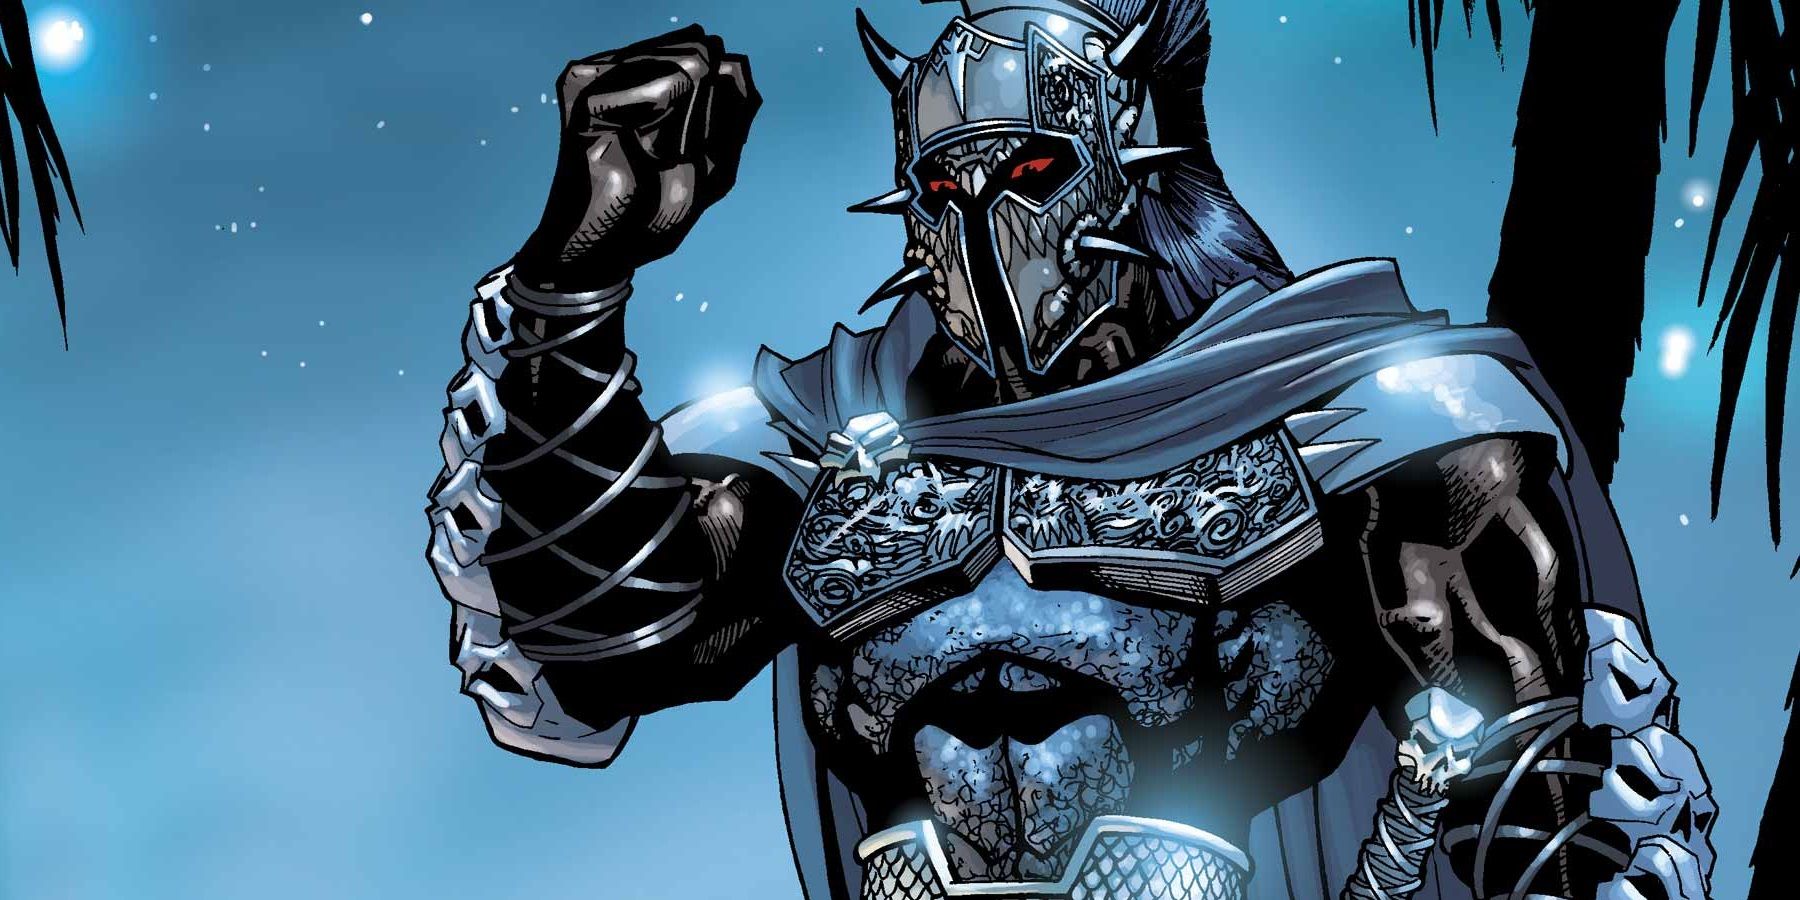 Ares from DC comics in his armor